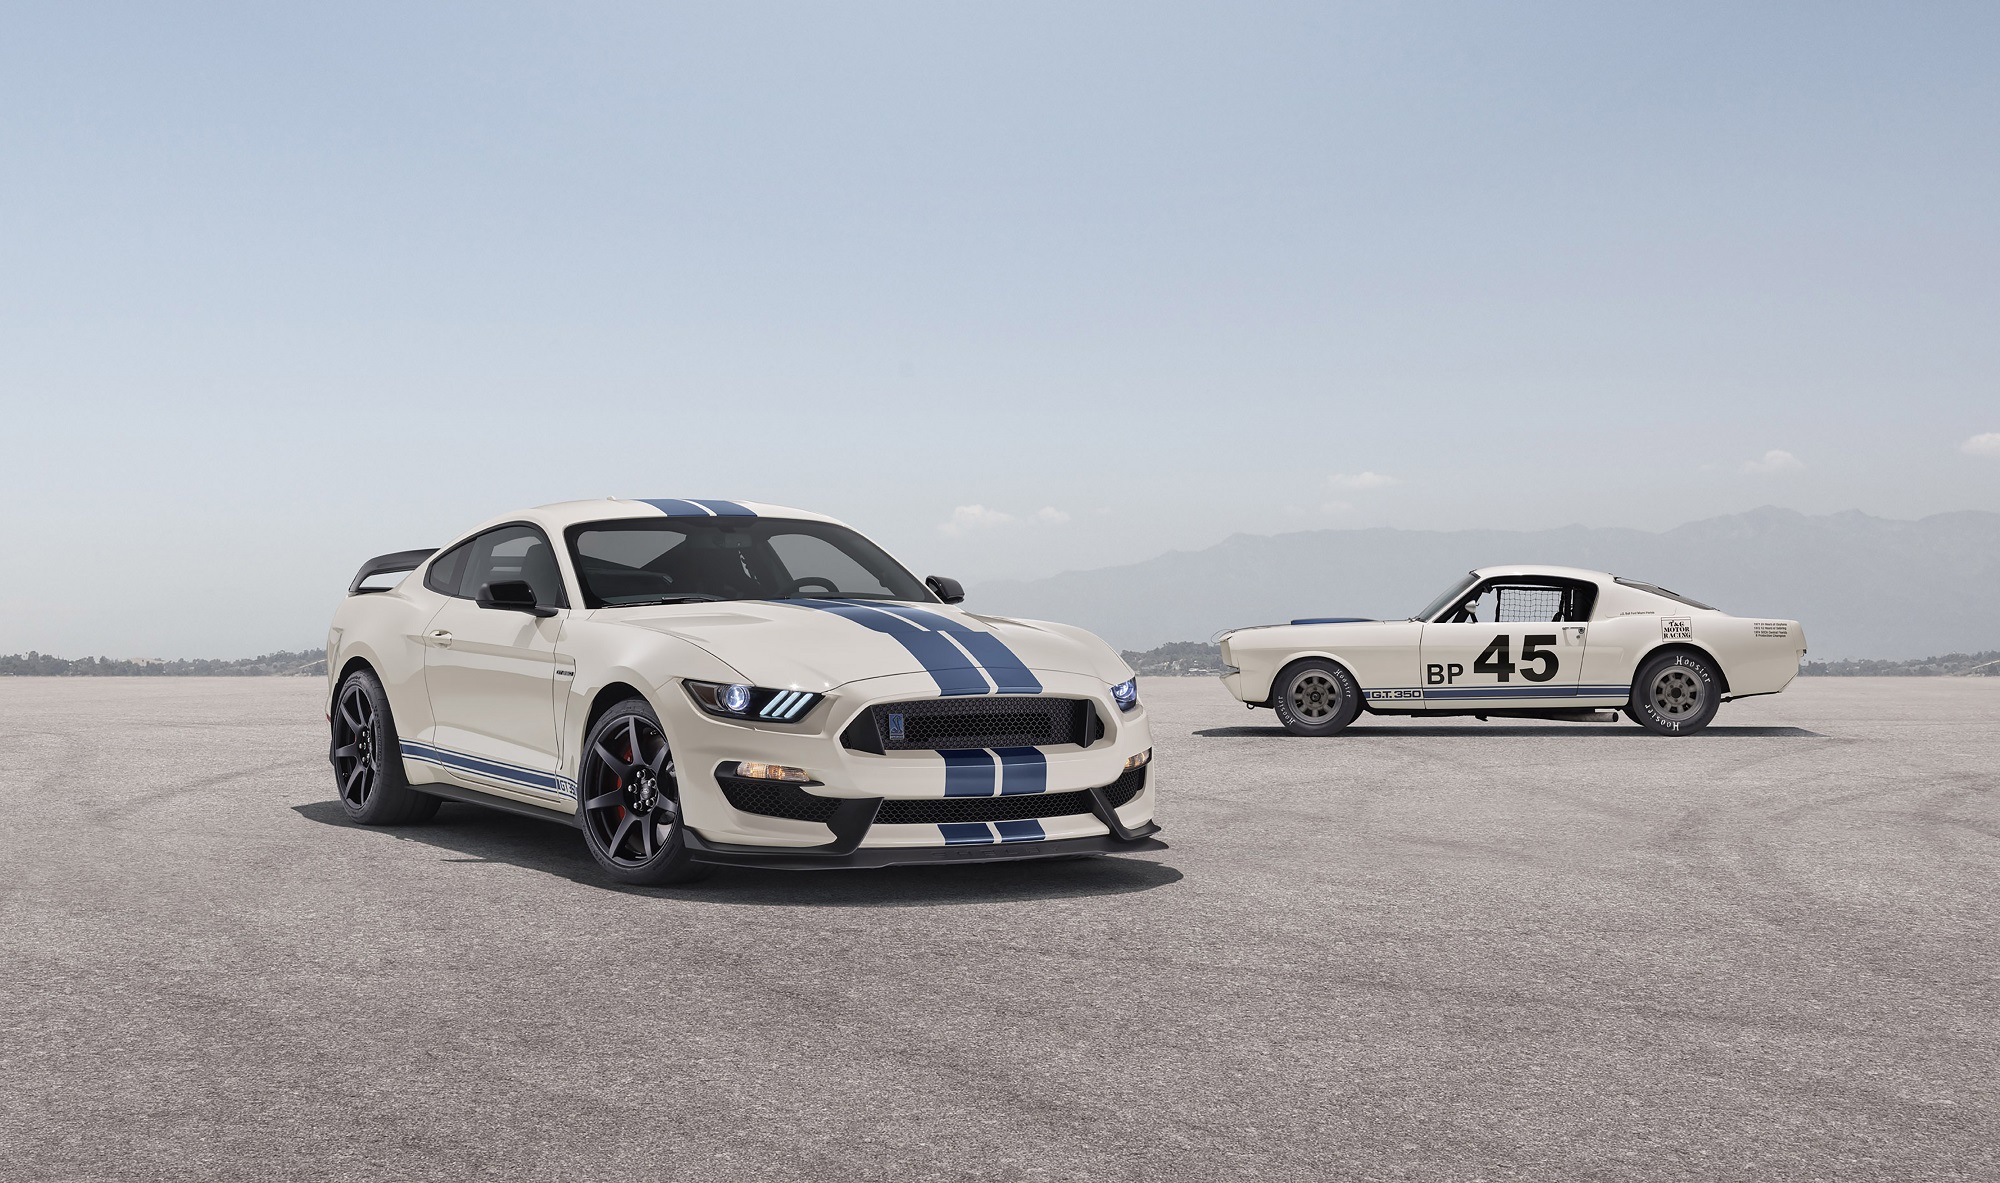 The Shelby GT350, like this one, and the new 500-horsepower Ford Mustang Dark Horse have 100 horsepower per liter.